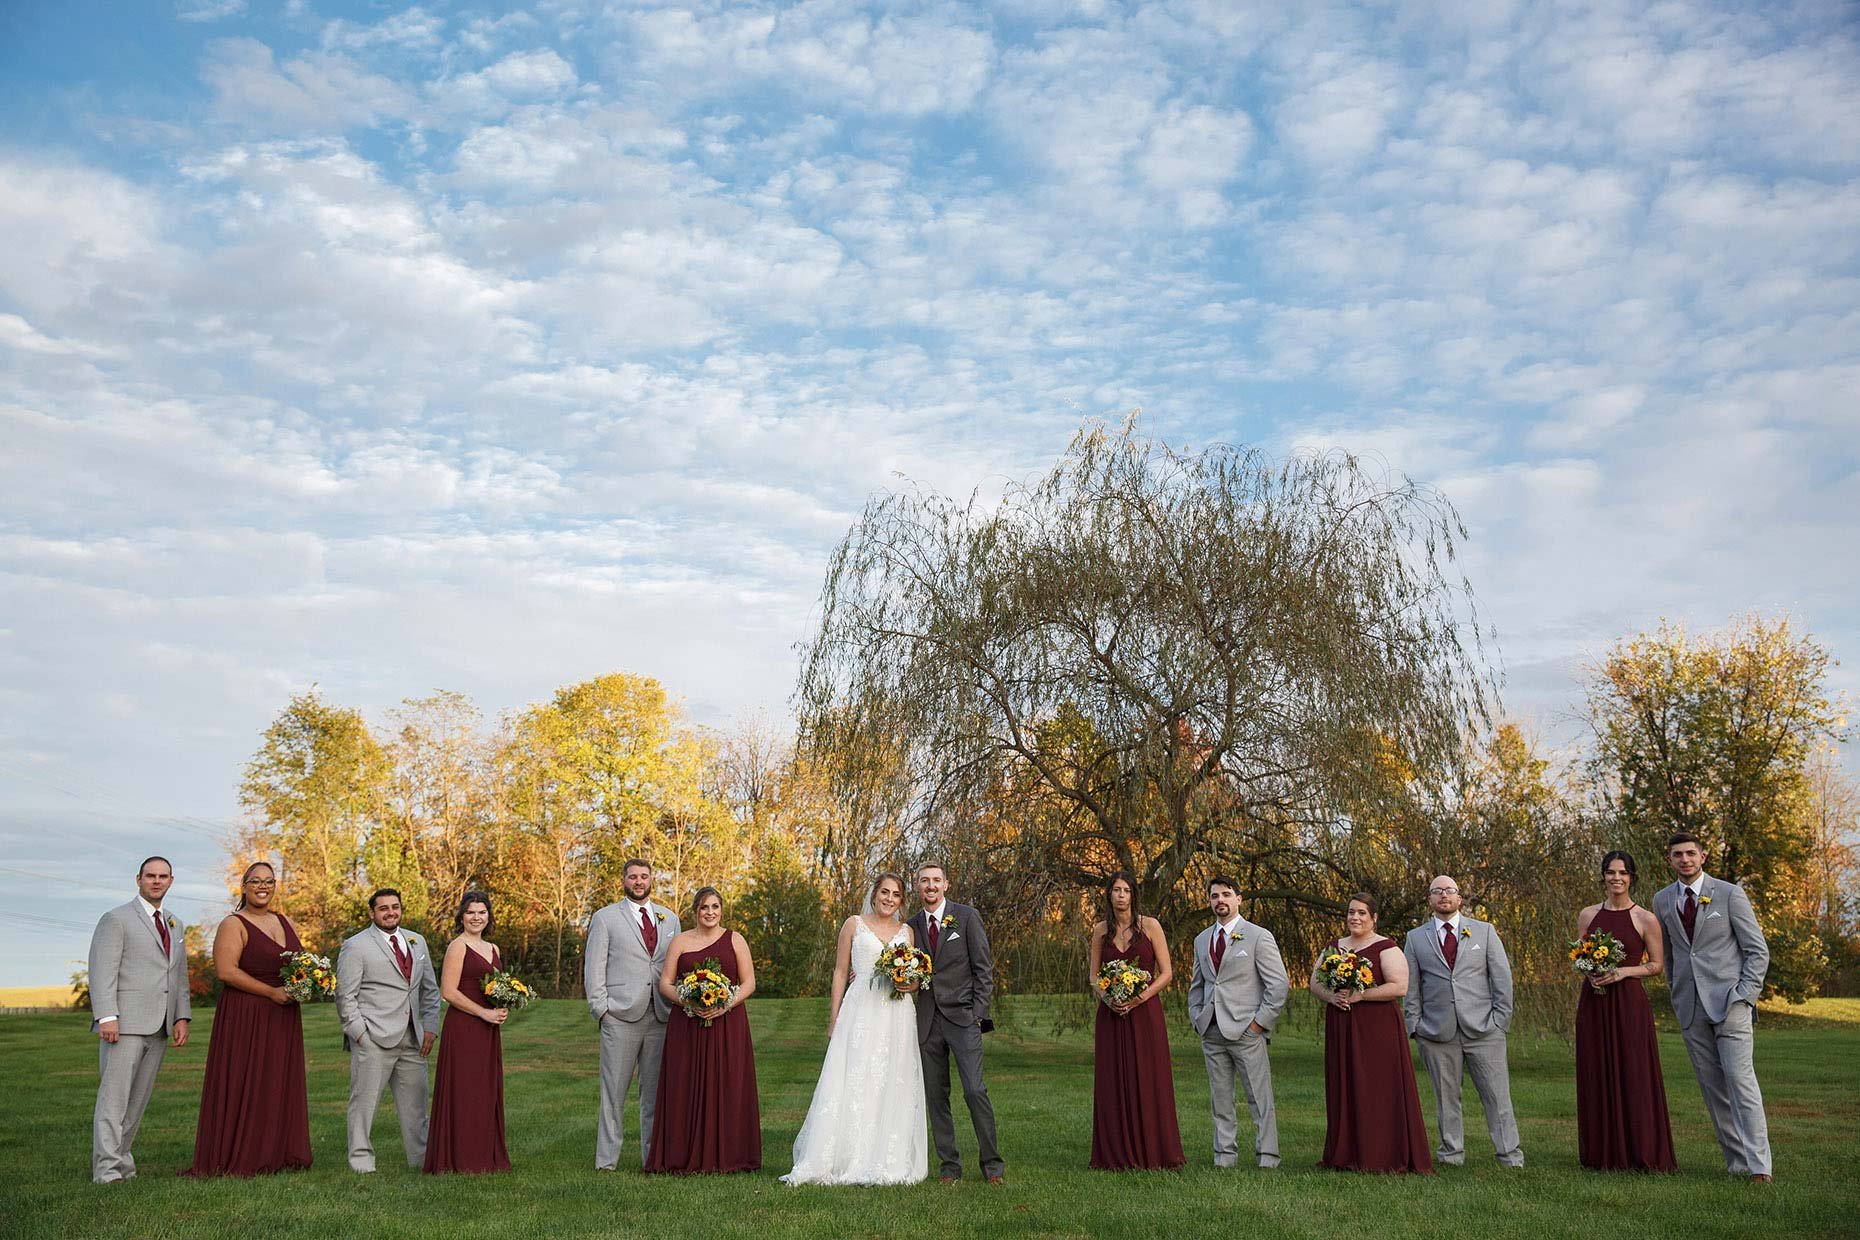 Bridal party in front of willow tree and blue sky